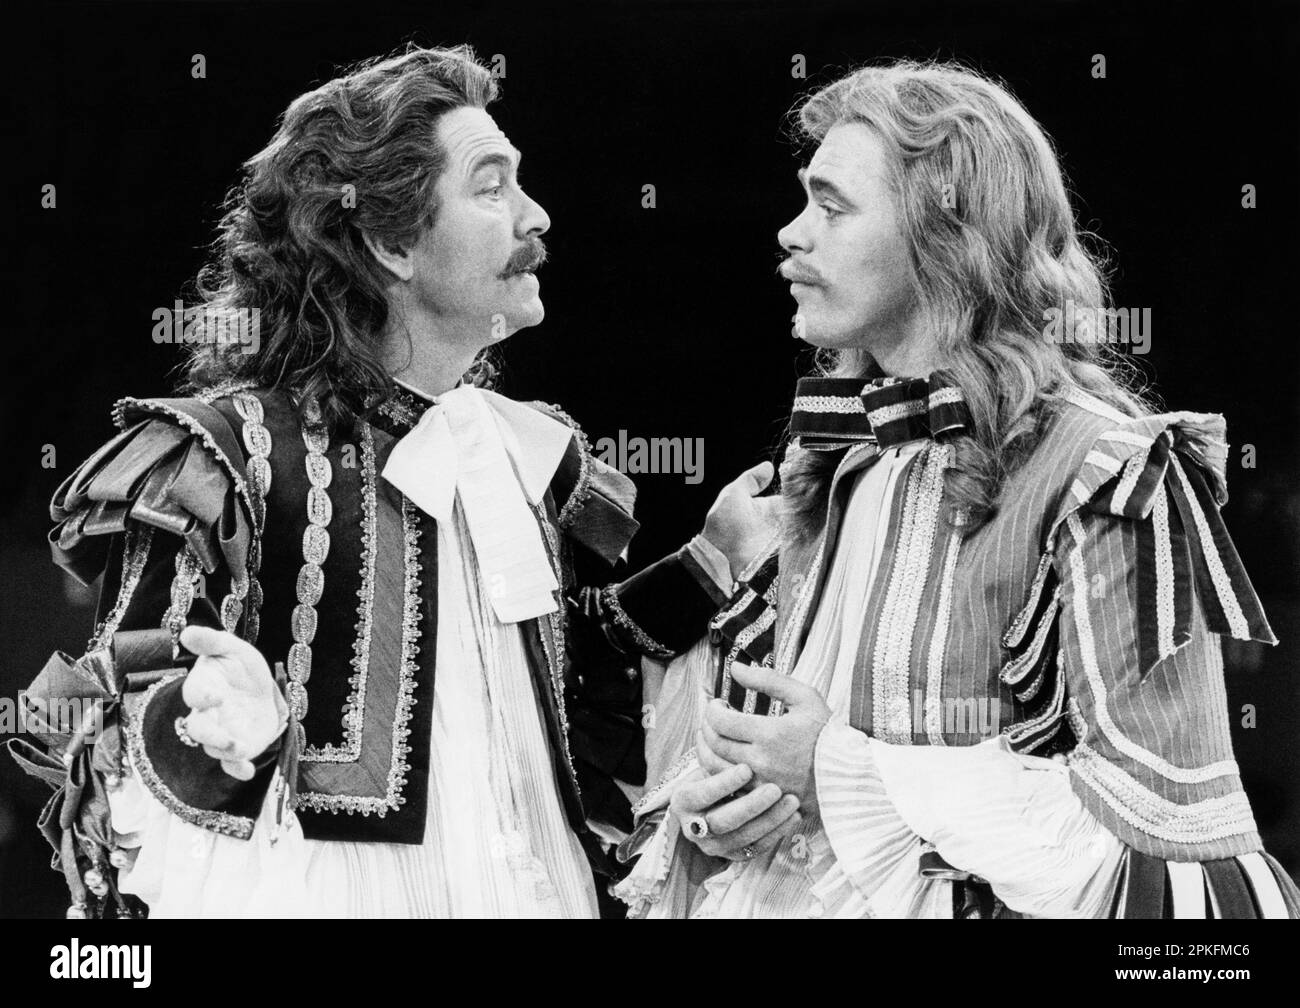 l-r: Tom Courtenay (Alceste), Christopher Gable (Philinte) in THE MISANTHROPE by Moliere at the Royal Exchange Theatre, Manchester, England  21/05/1981  translated by Richard Wilbur  design: Malcolm Pride  lighting: Joe Davis  director: Casper Wrede Stock Photo